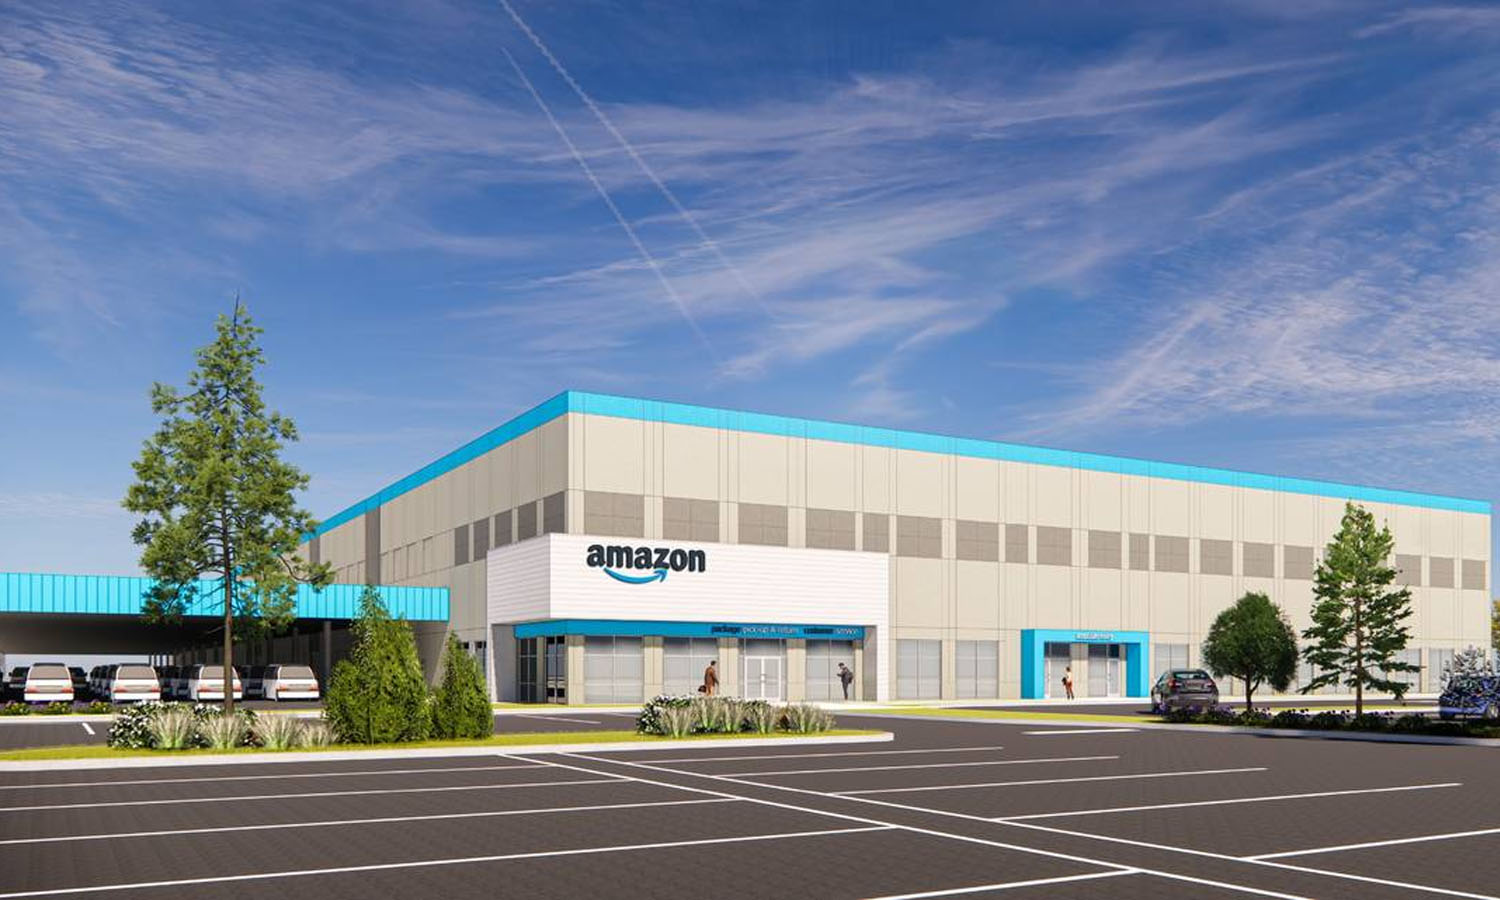 Amazon Delivery Station Under Construction in Meridian, Idaho